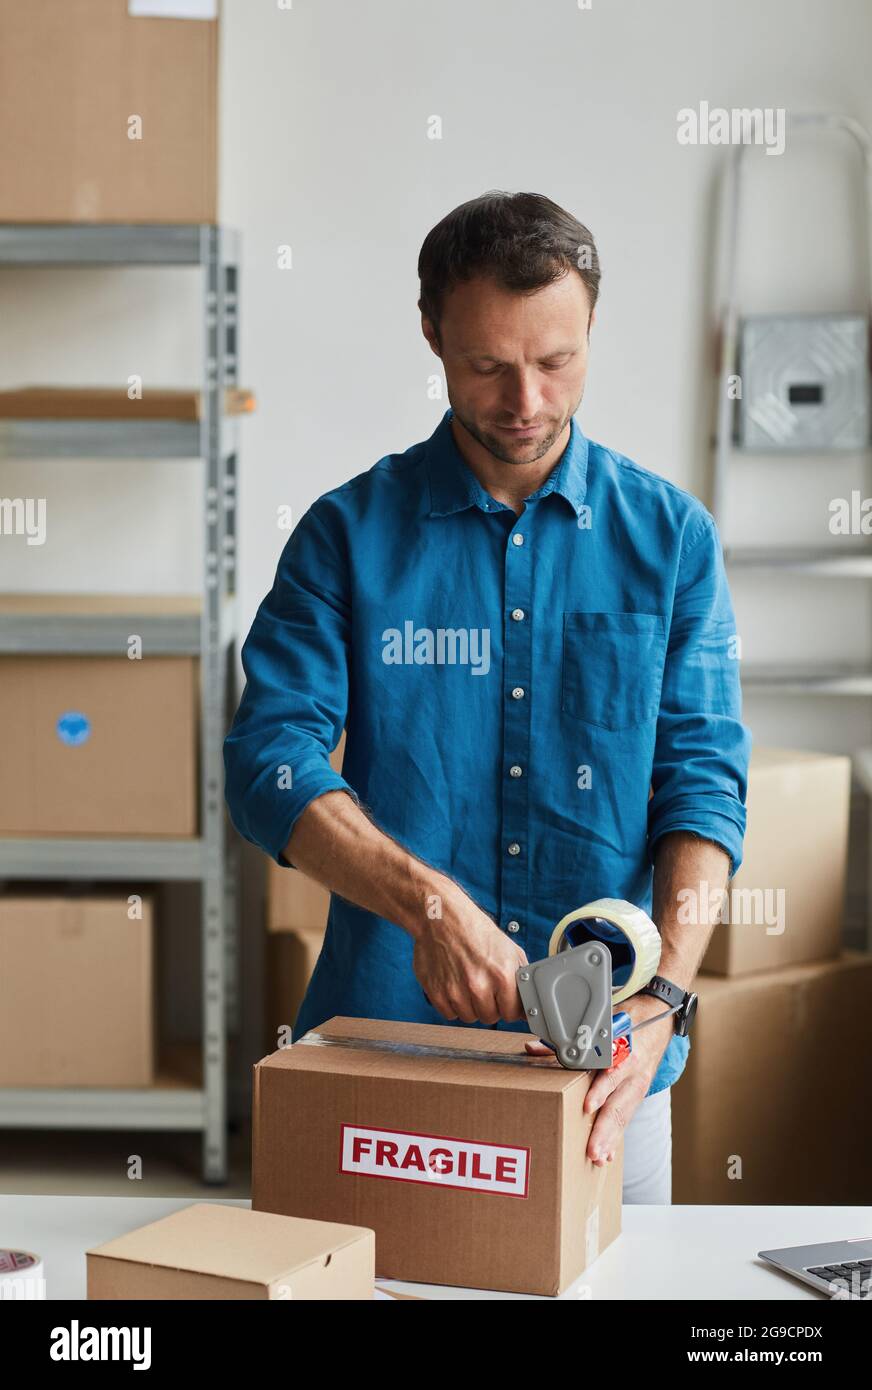 Vertical portrait of young man packing boxes at warehouse with Fragile sticker, copy space Stock Photo